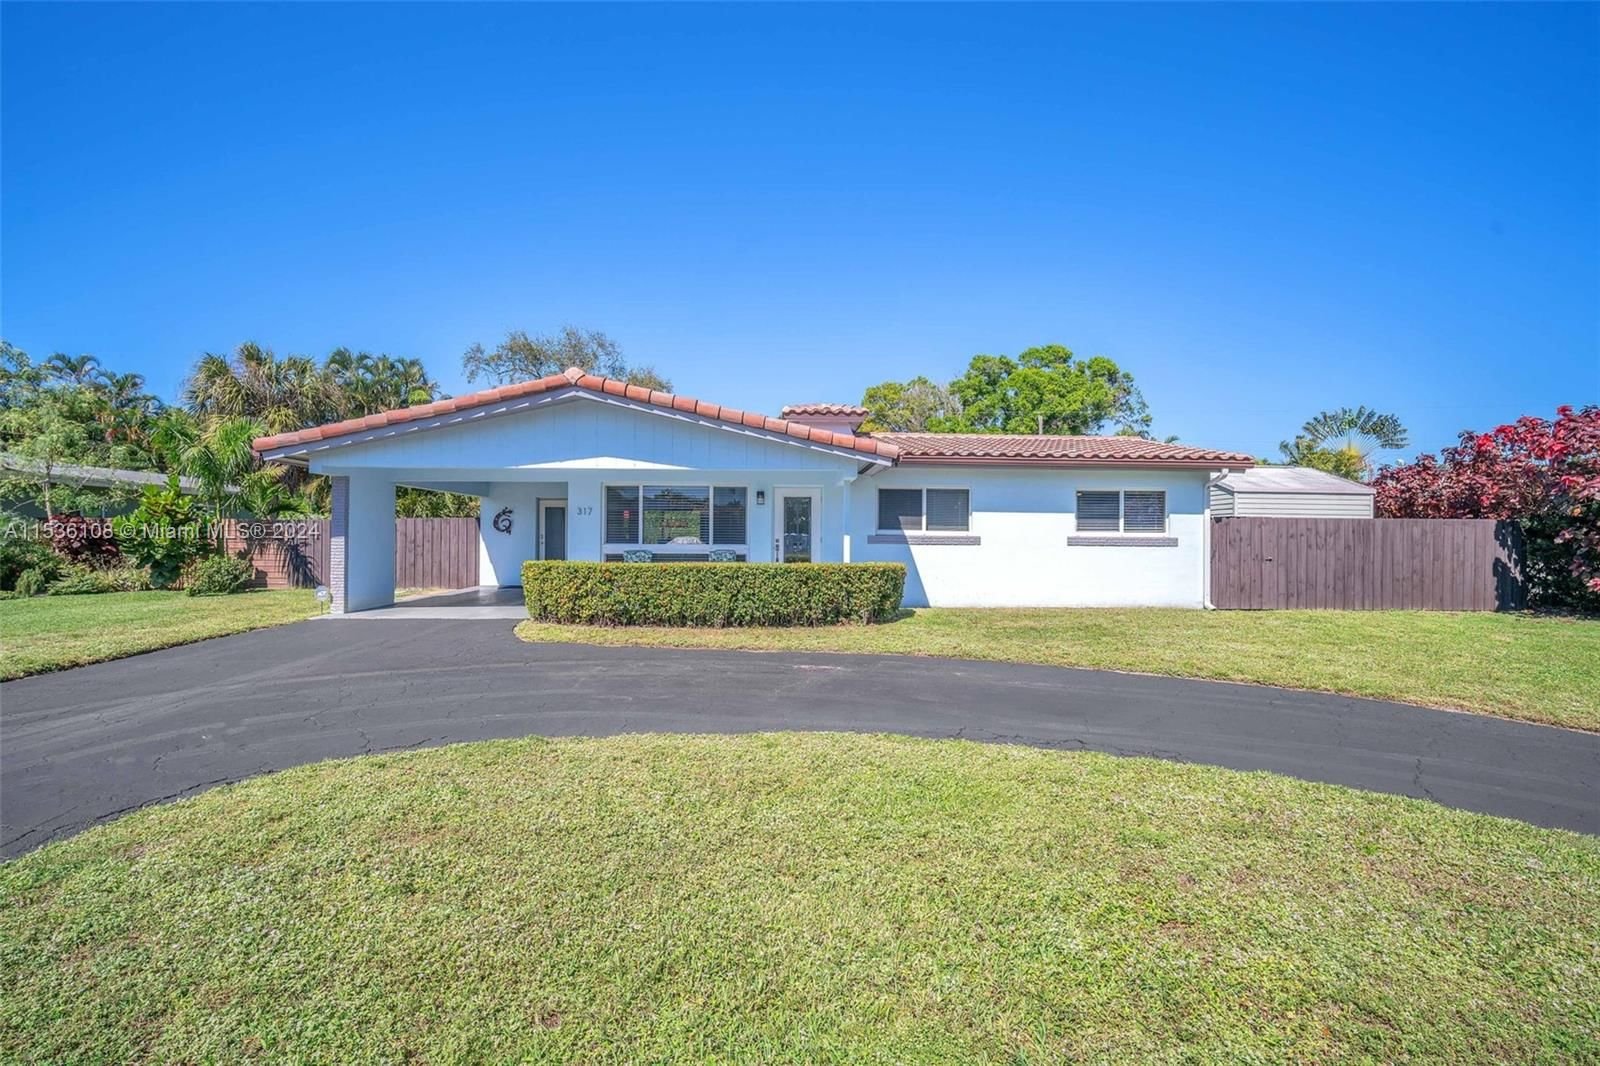 Real estate property located at 317 23rd St, Broward County, HILLBROOK, Wilton Manors, FL